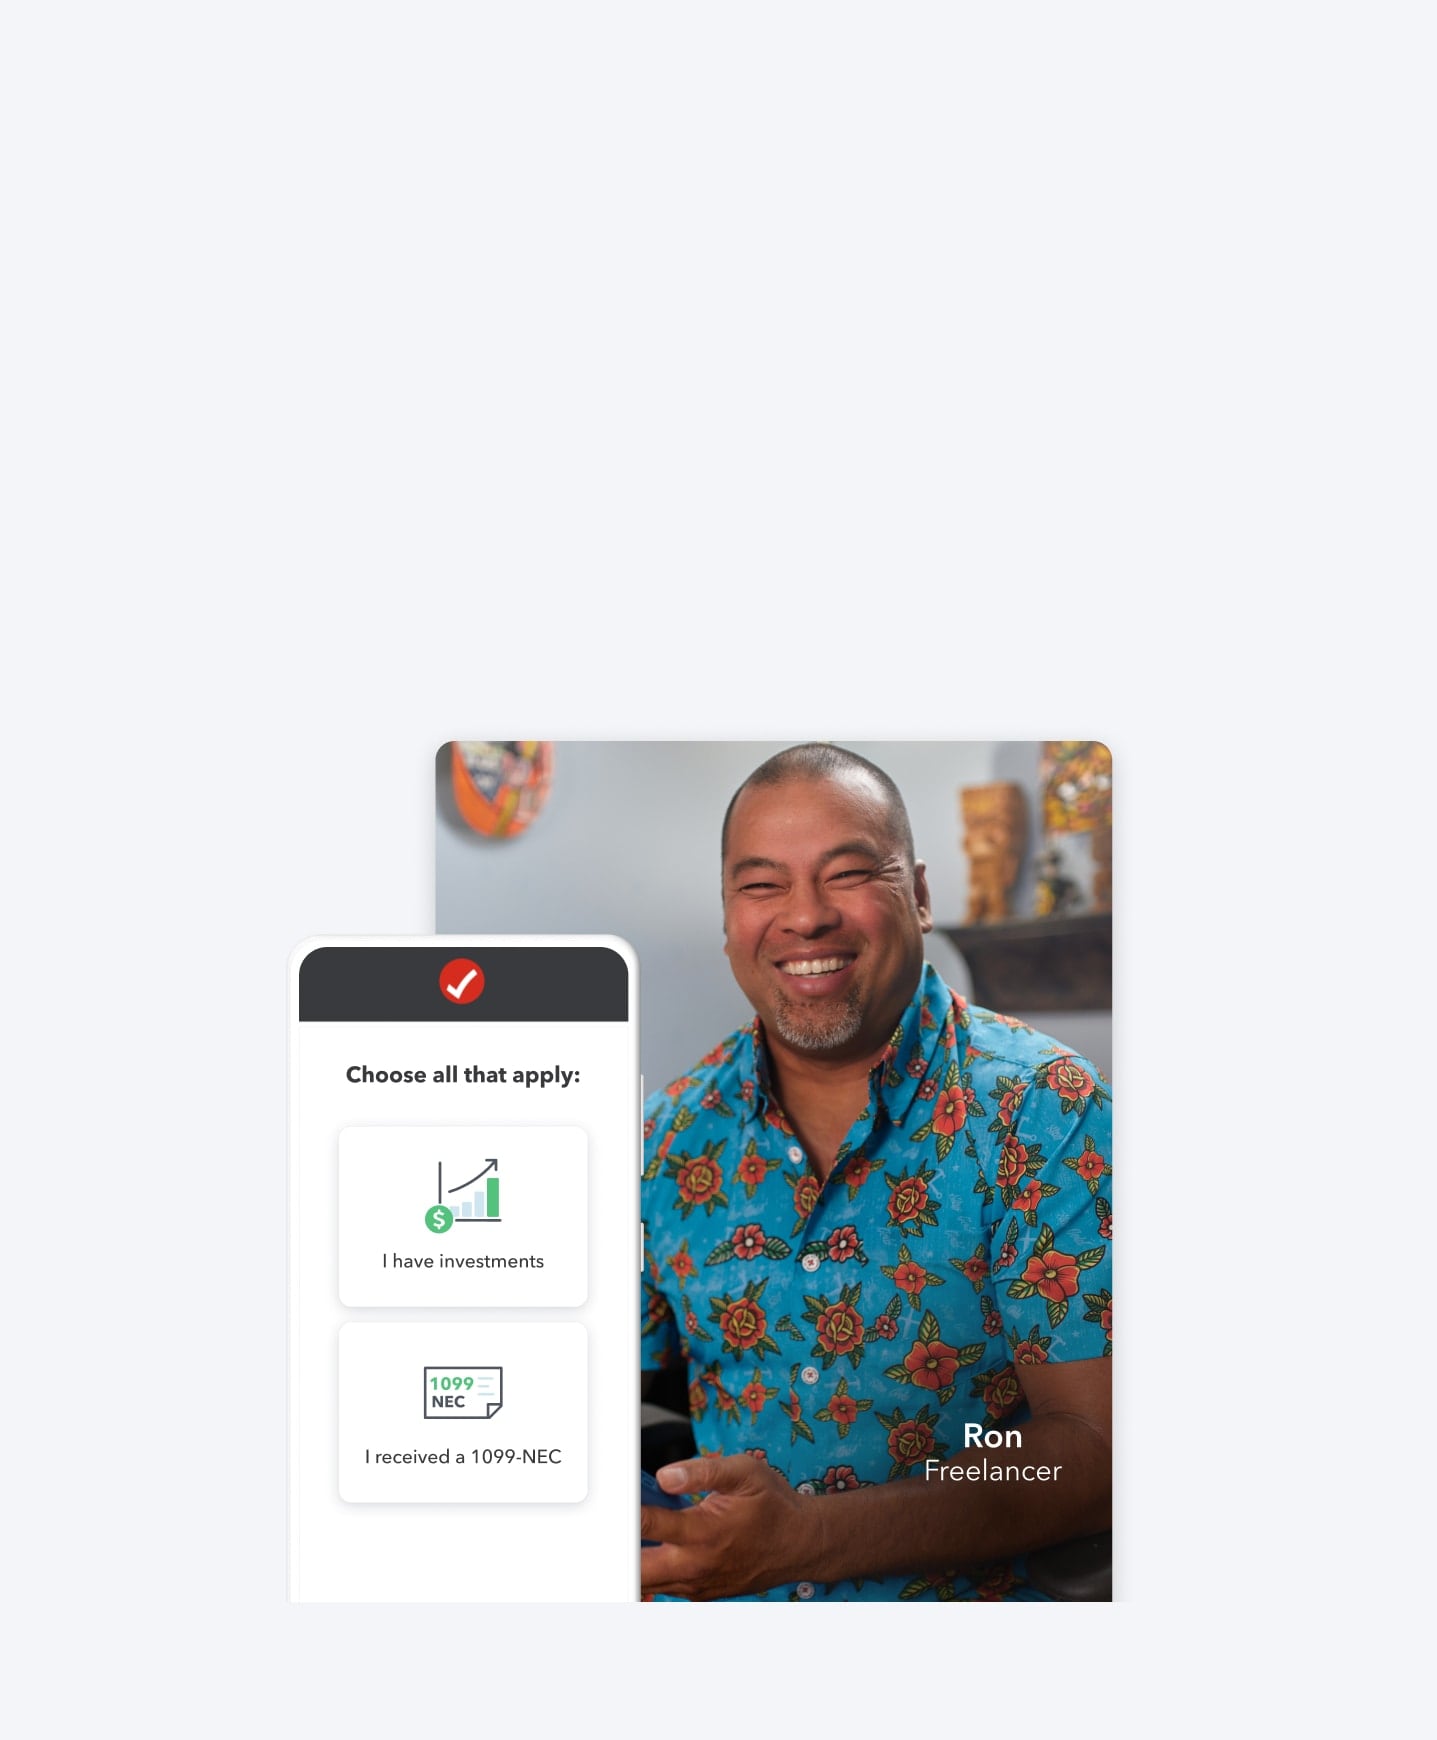 Ron, a TurboTax customer who freelances, is smiling. A phone screen says “Choose all that apply” and shows “I have investments” and “I received a 1099-NEC."